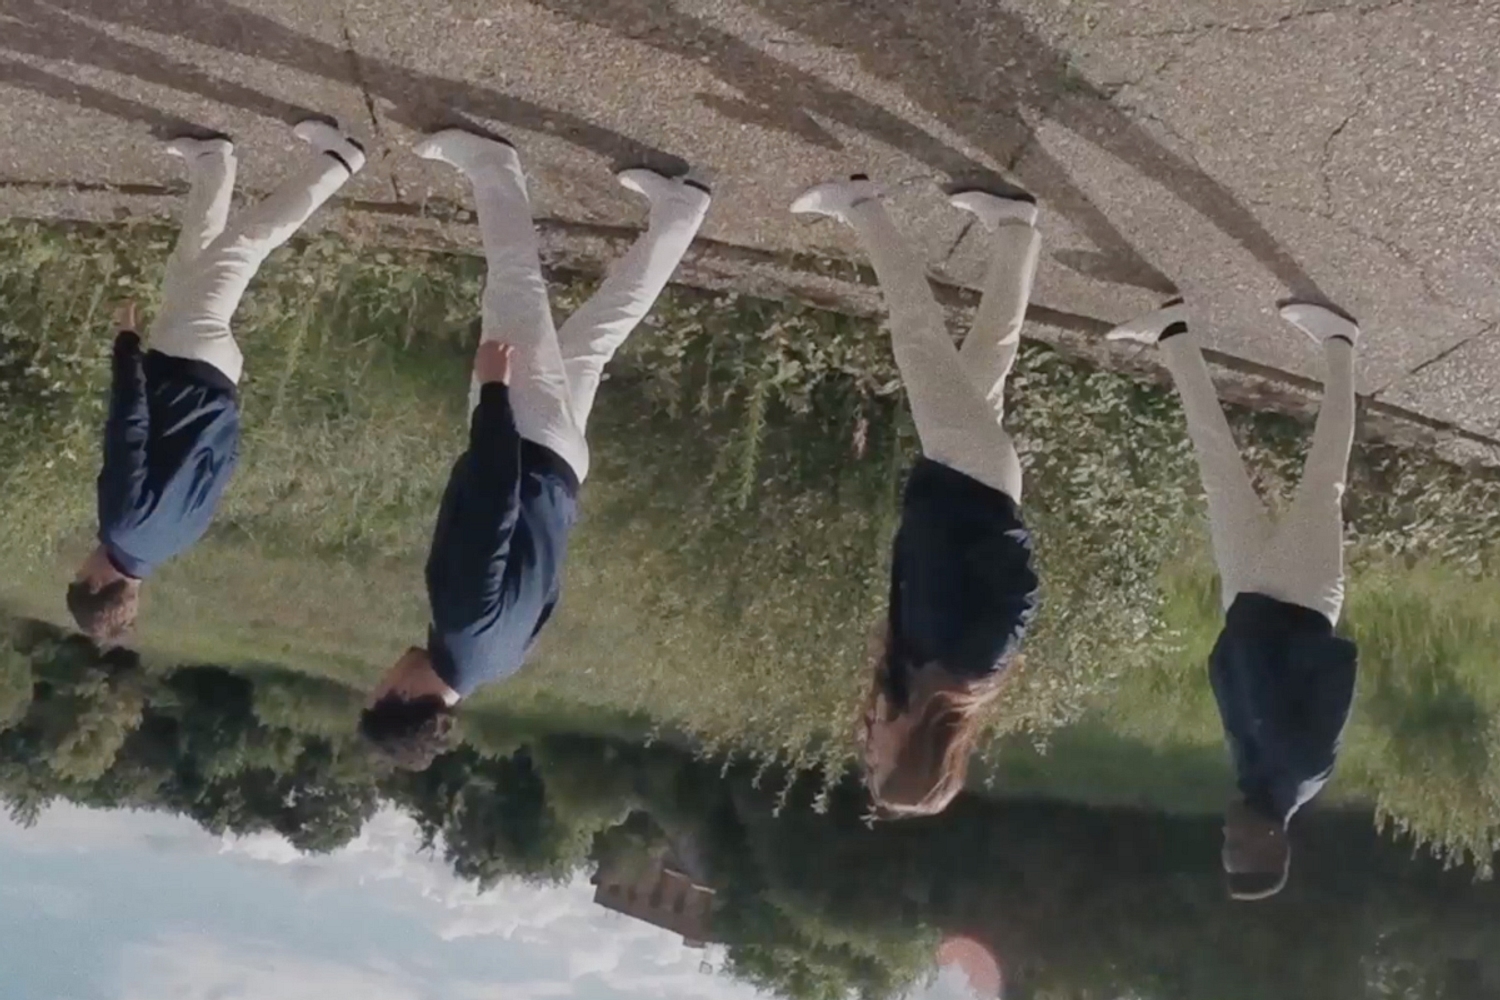 Metronomy go topsy turvy for new ‘Month of Sundays’ video